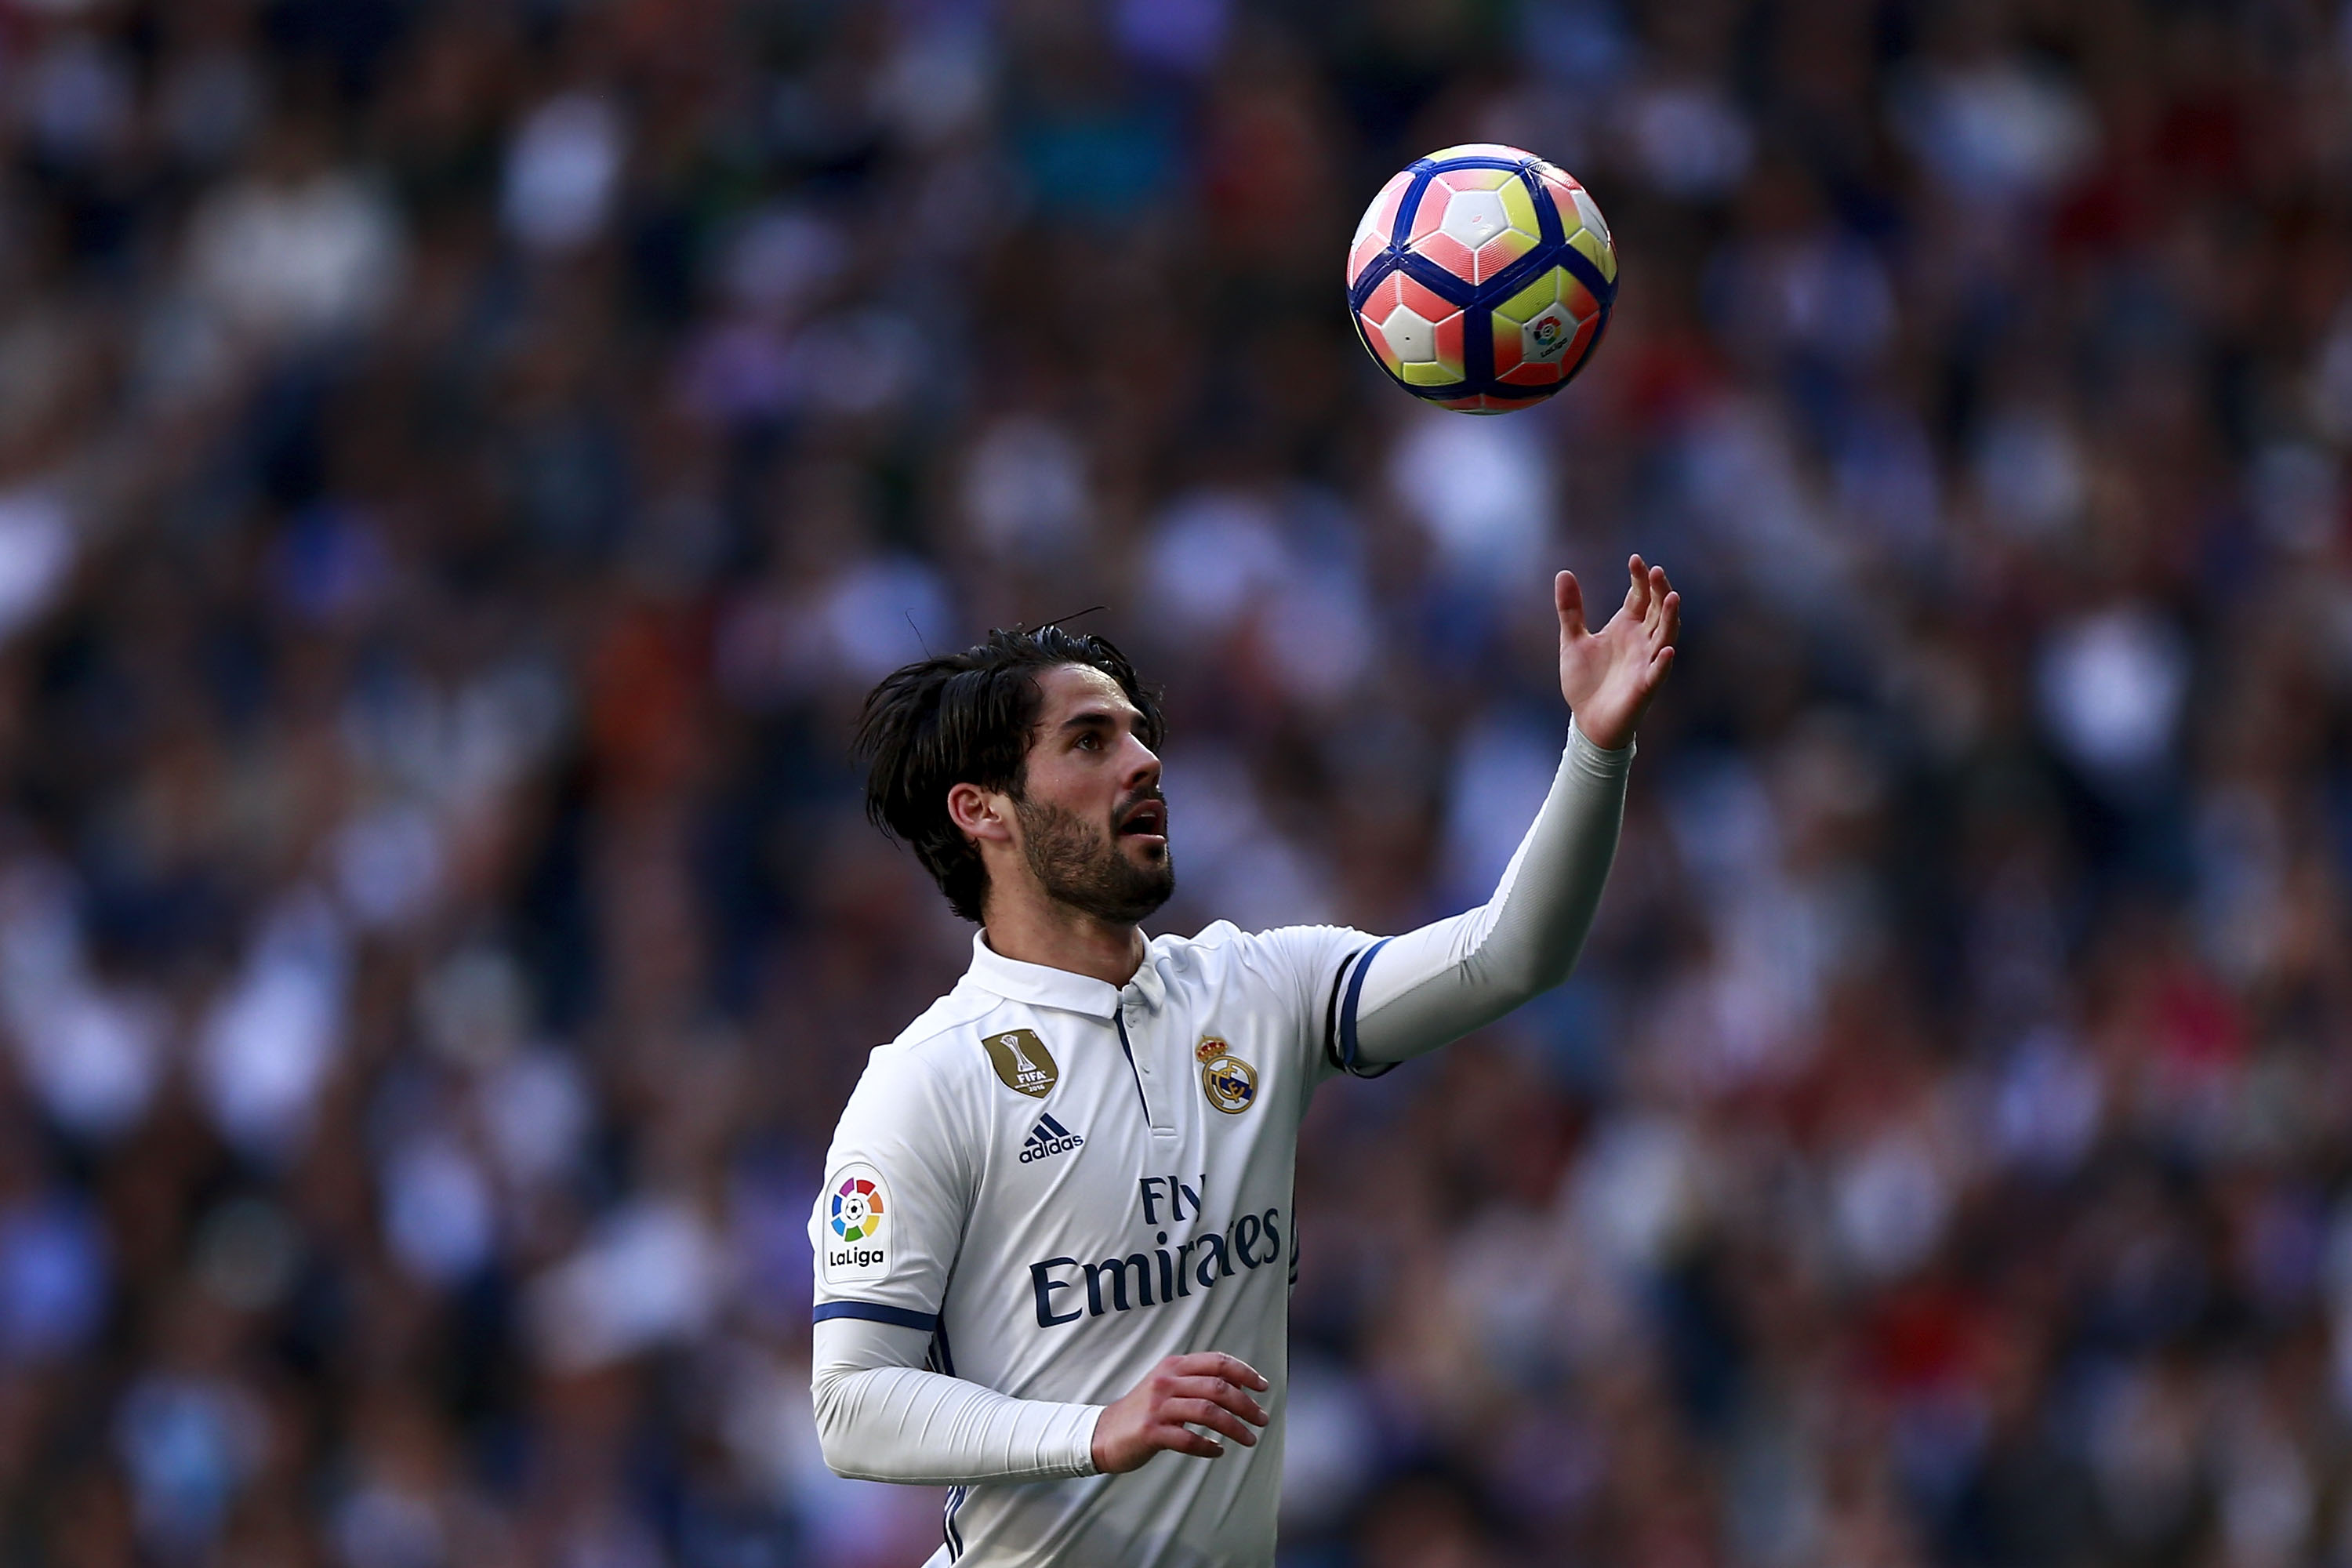 MADRID, SPAIN - APRIL 02: Francisco Roman Alarcon alias Isco of Real Madrid CF takes the ball for a kickoff during the La Liga match between Real Madrid CF and Deportivo Alaves at Estadio Santiago Bernabeu on April 2, 2017 in Madrid, Spain.  (Photo by Gonzalo Arroyo Moreno/Getty Images)